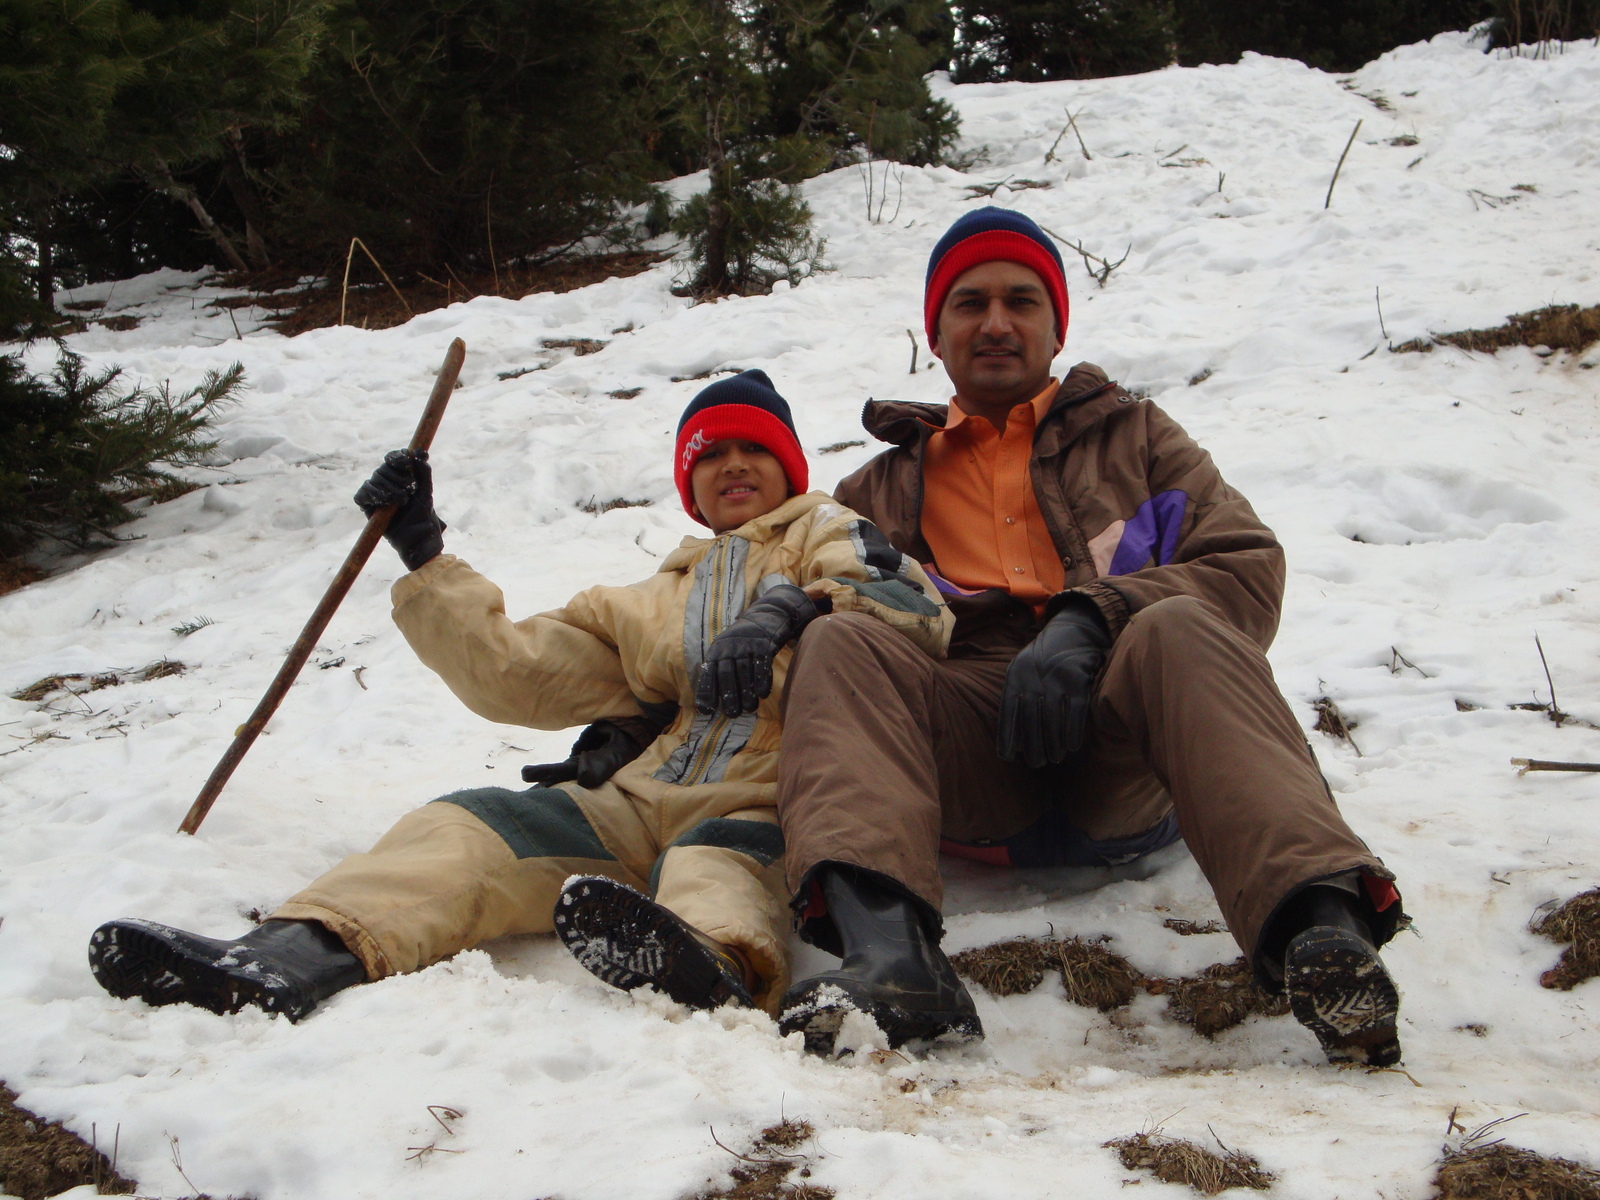 trip to manali -snow fighting with family